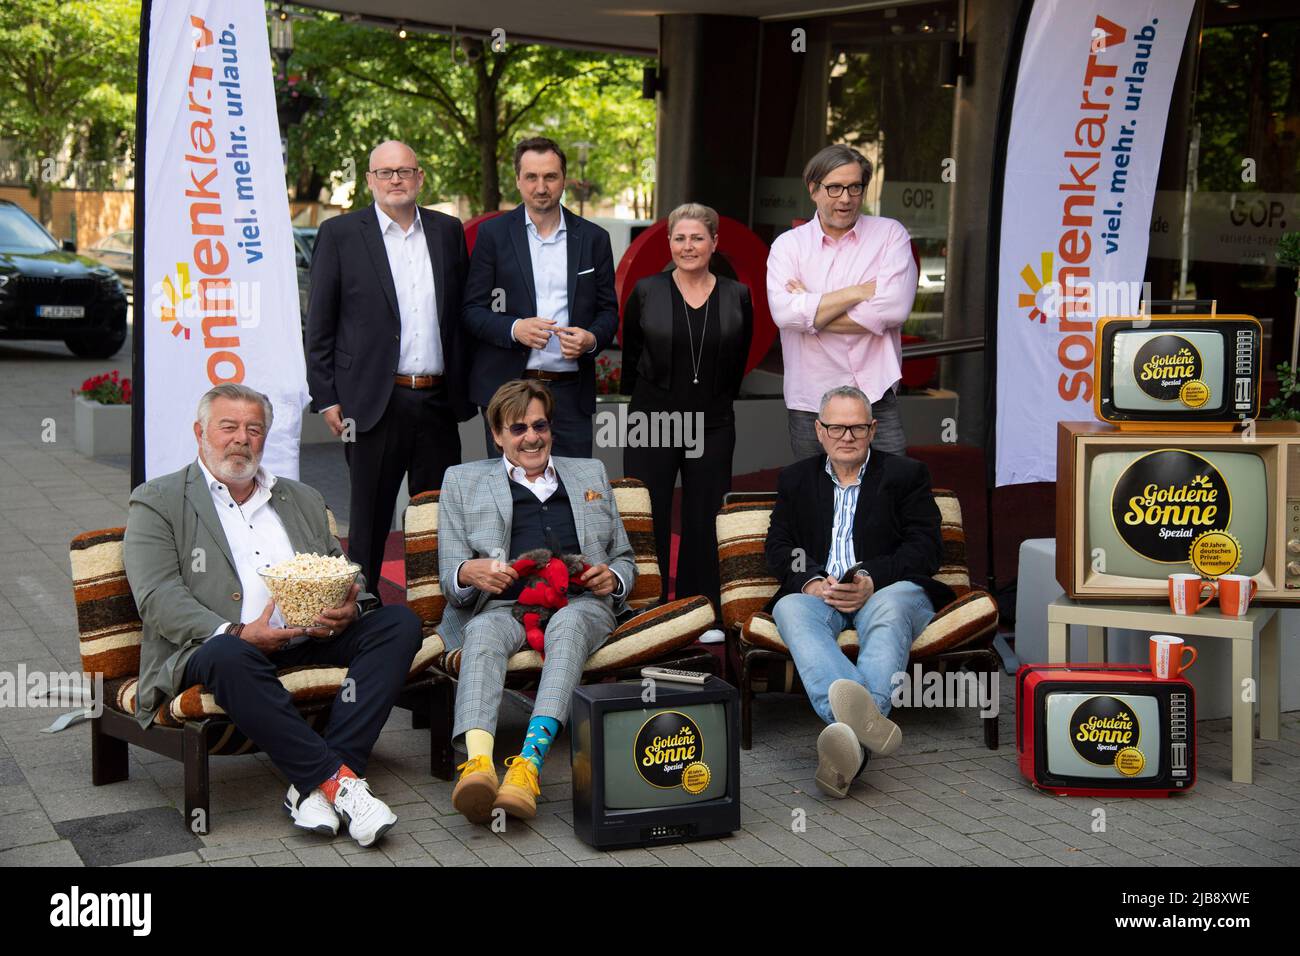 back from left: Andreas LAMBECK, managing director of sonnenklar.tv, Richard ROEHRHOFF, Rohrhoff, managing director of EMG Essen Marketing Gesellschaft, Nadine STOECKMANN, Stockmann, director of GOP Variete Essen, Ruediger KONETSCHNY, musician, the radio band show act, front from left: Harry WIJNVOORD, moderator, Joerg DRAEGER, Jorg Drager, moderator, Ulrich Ulli POTOFSKI, moderator, press conference to present the gala on the occasion of 40 years of private television with the award ceremony Die Goldene Sonne, in the GOP Variete in Essen, 03.06.2022 Stock Photo